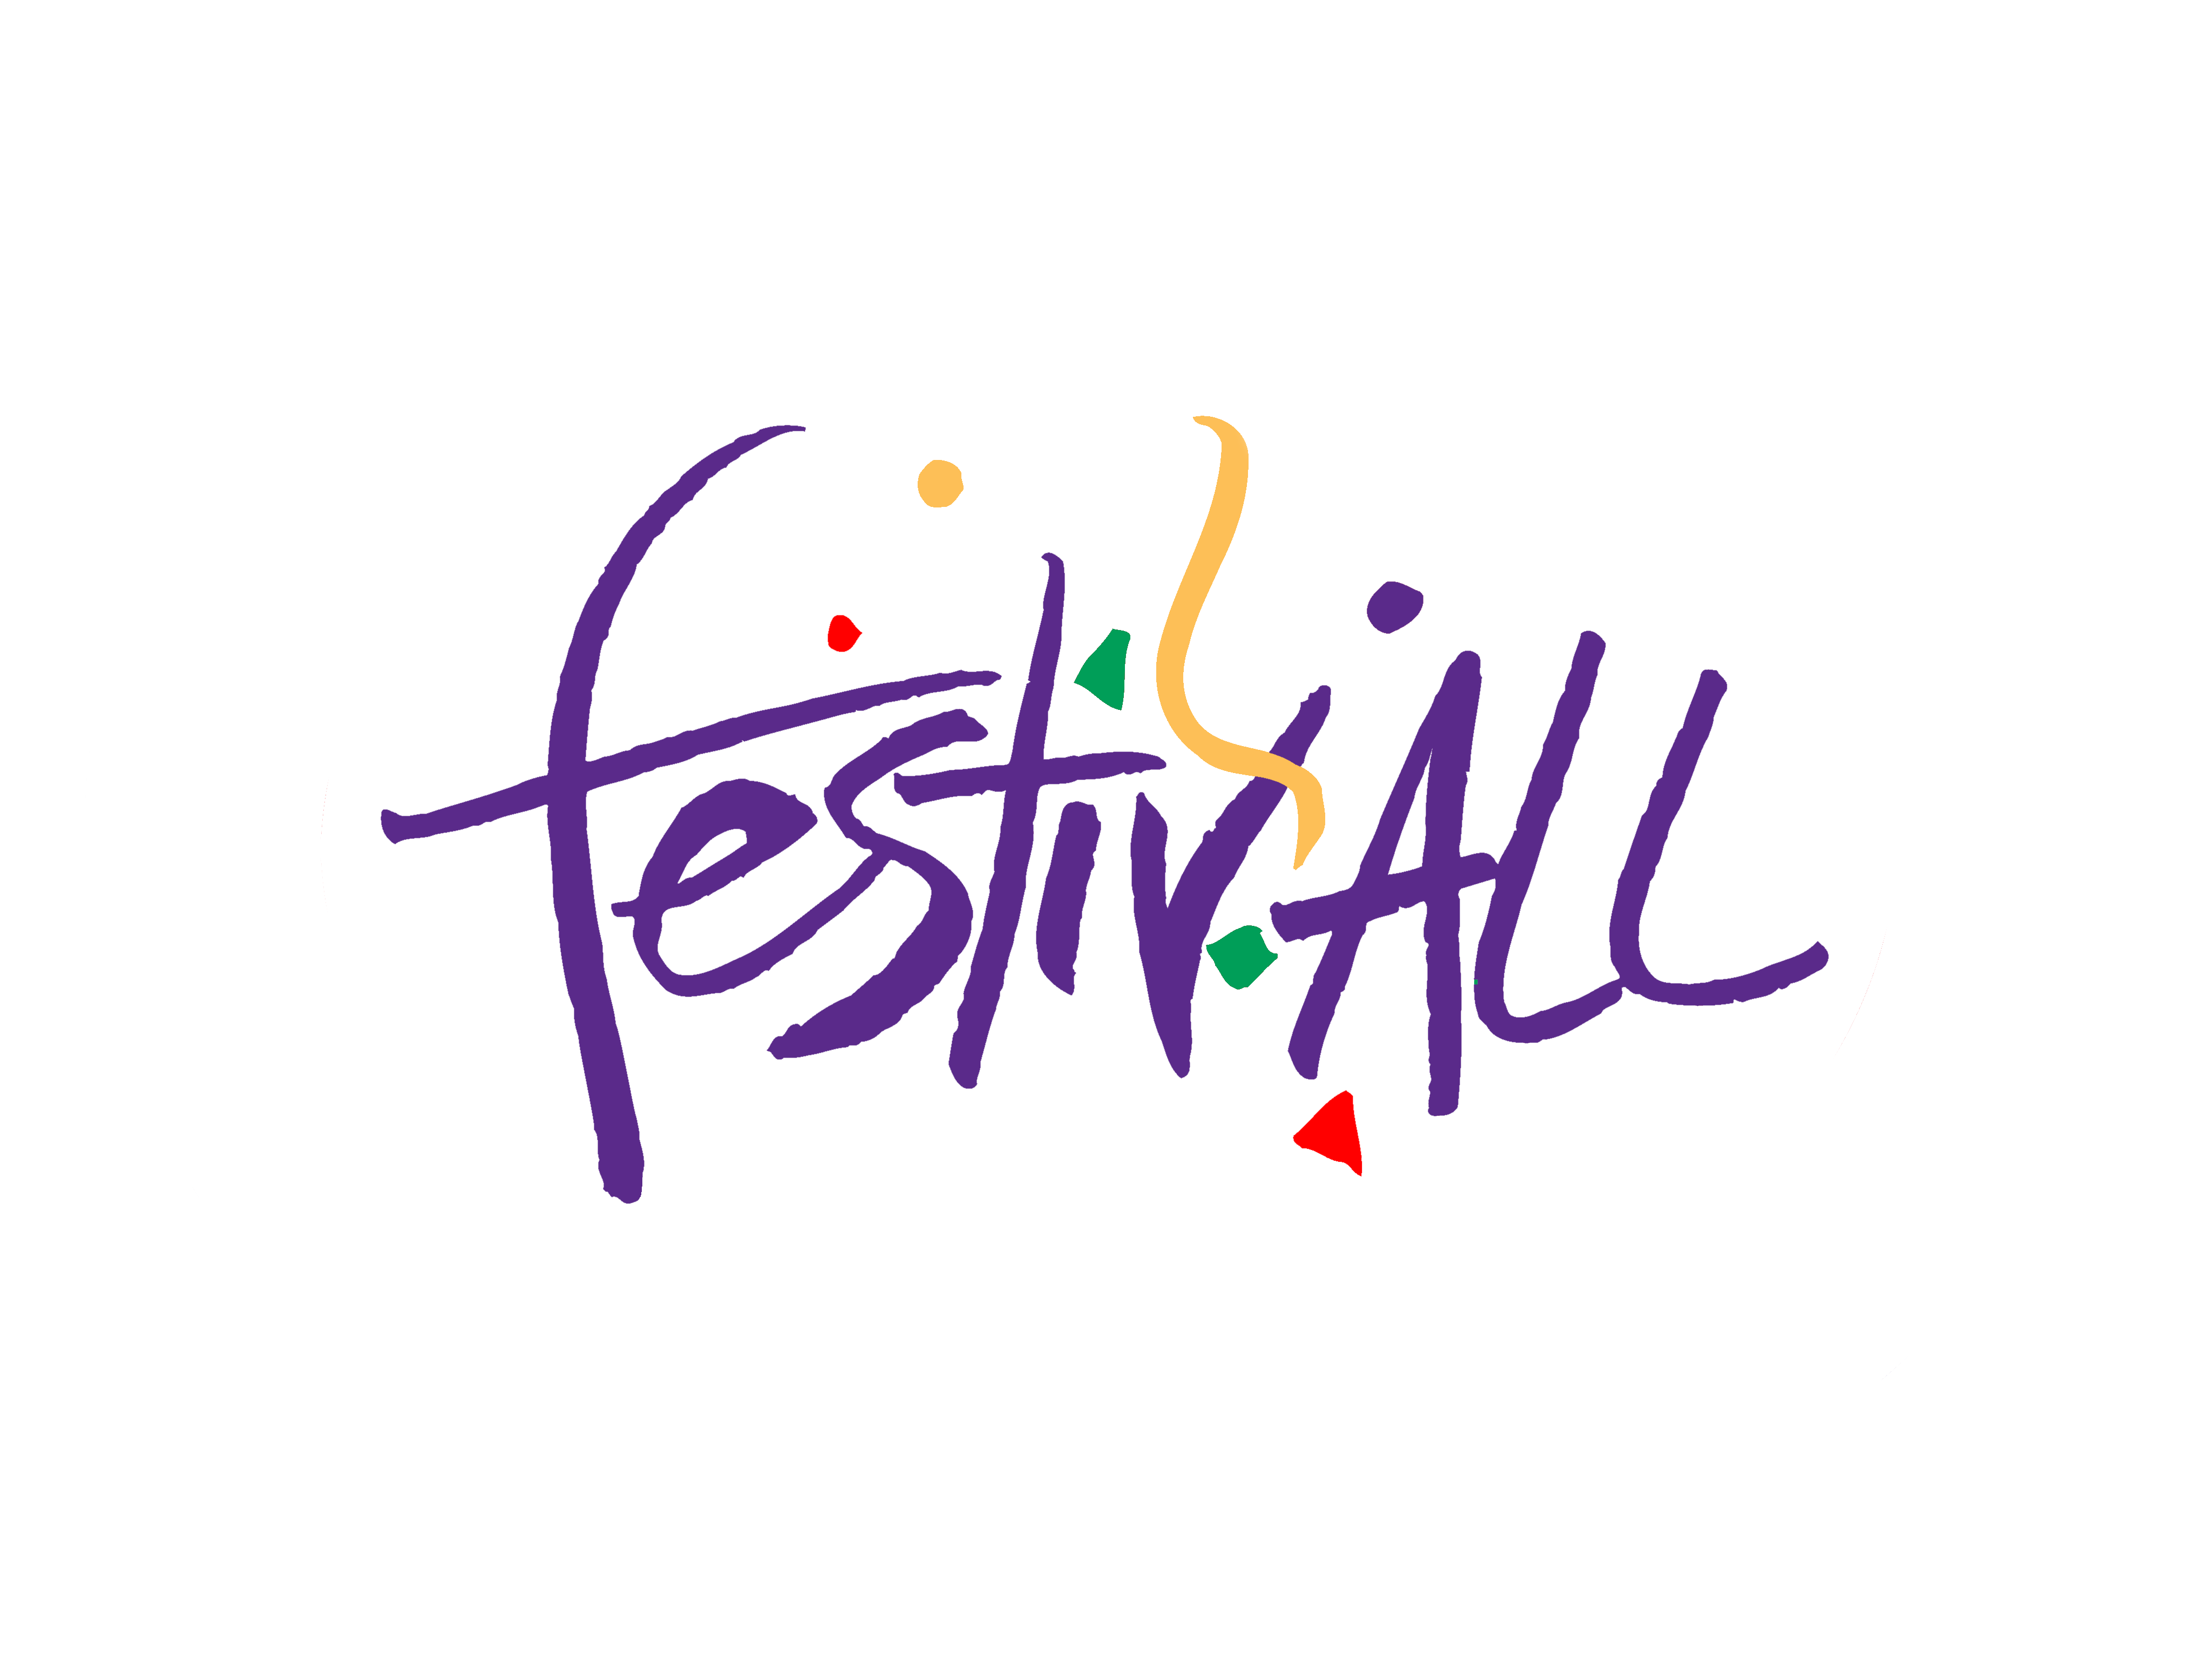 Official 2022 FestivALL Schedule - Charleston, West Virginia- FestivALL